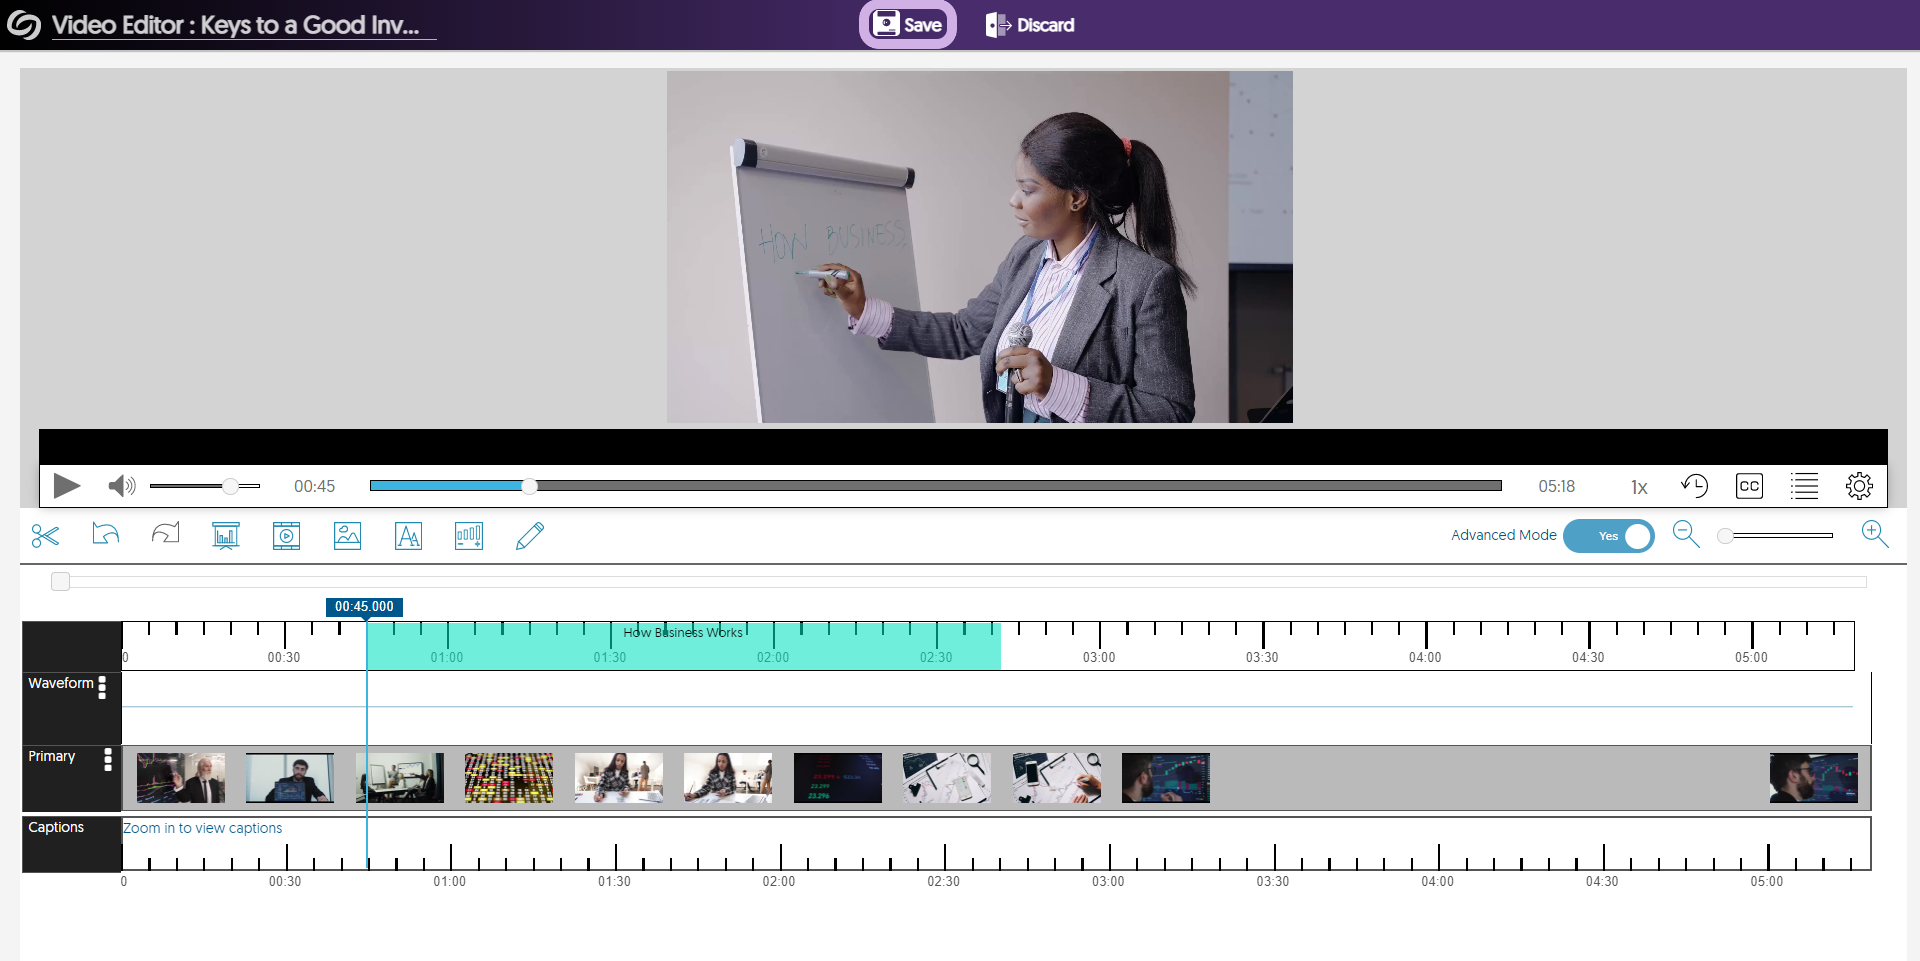 The video editor with the Save button highlighted.